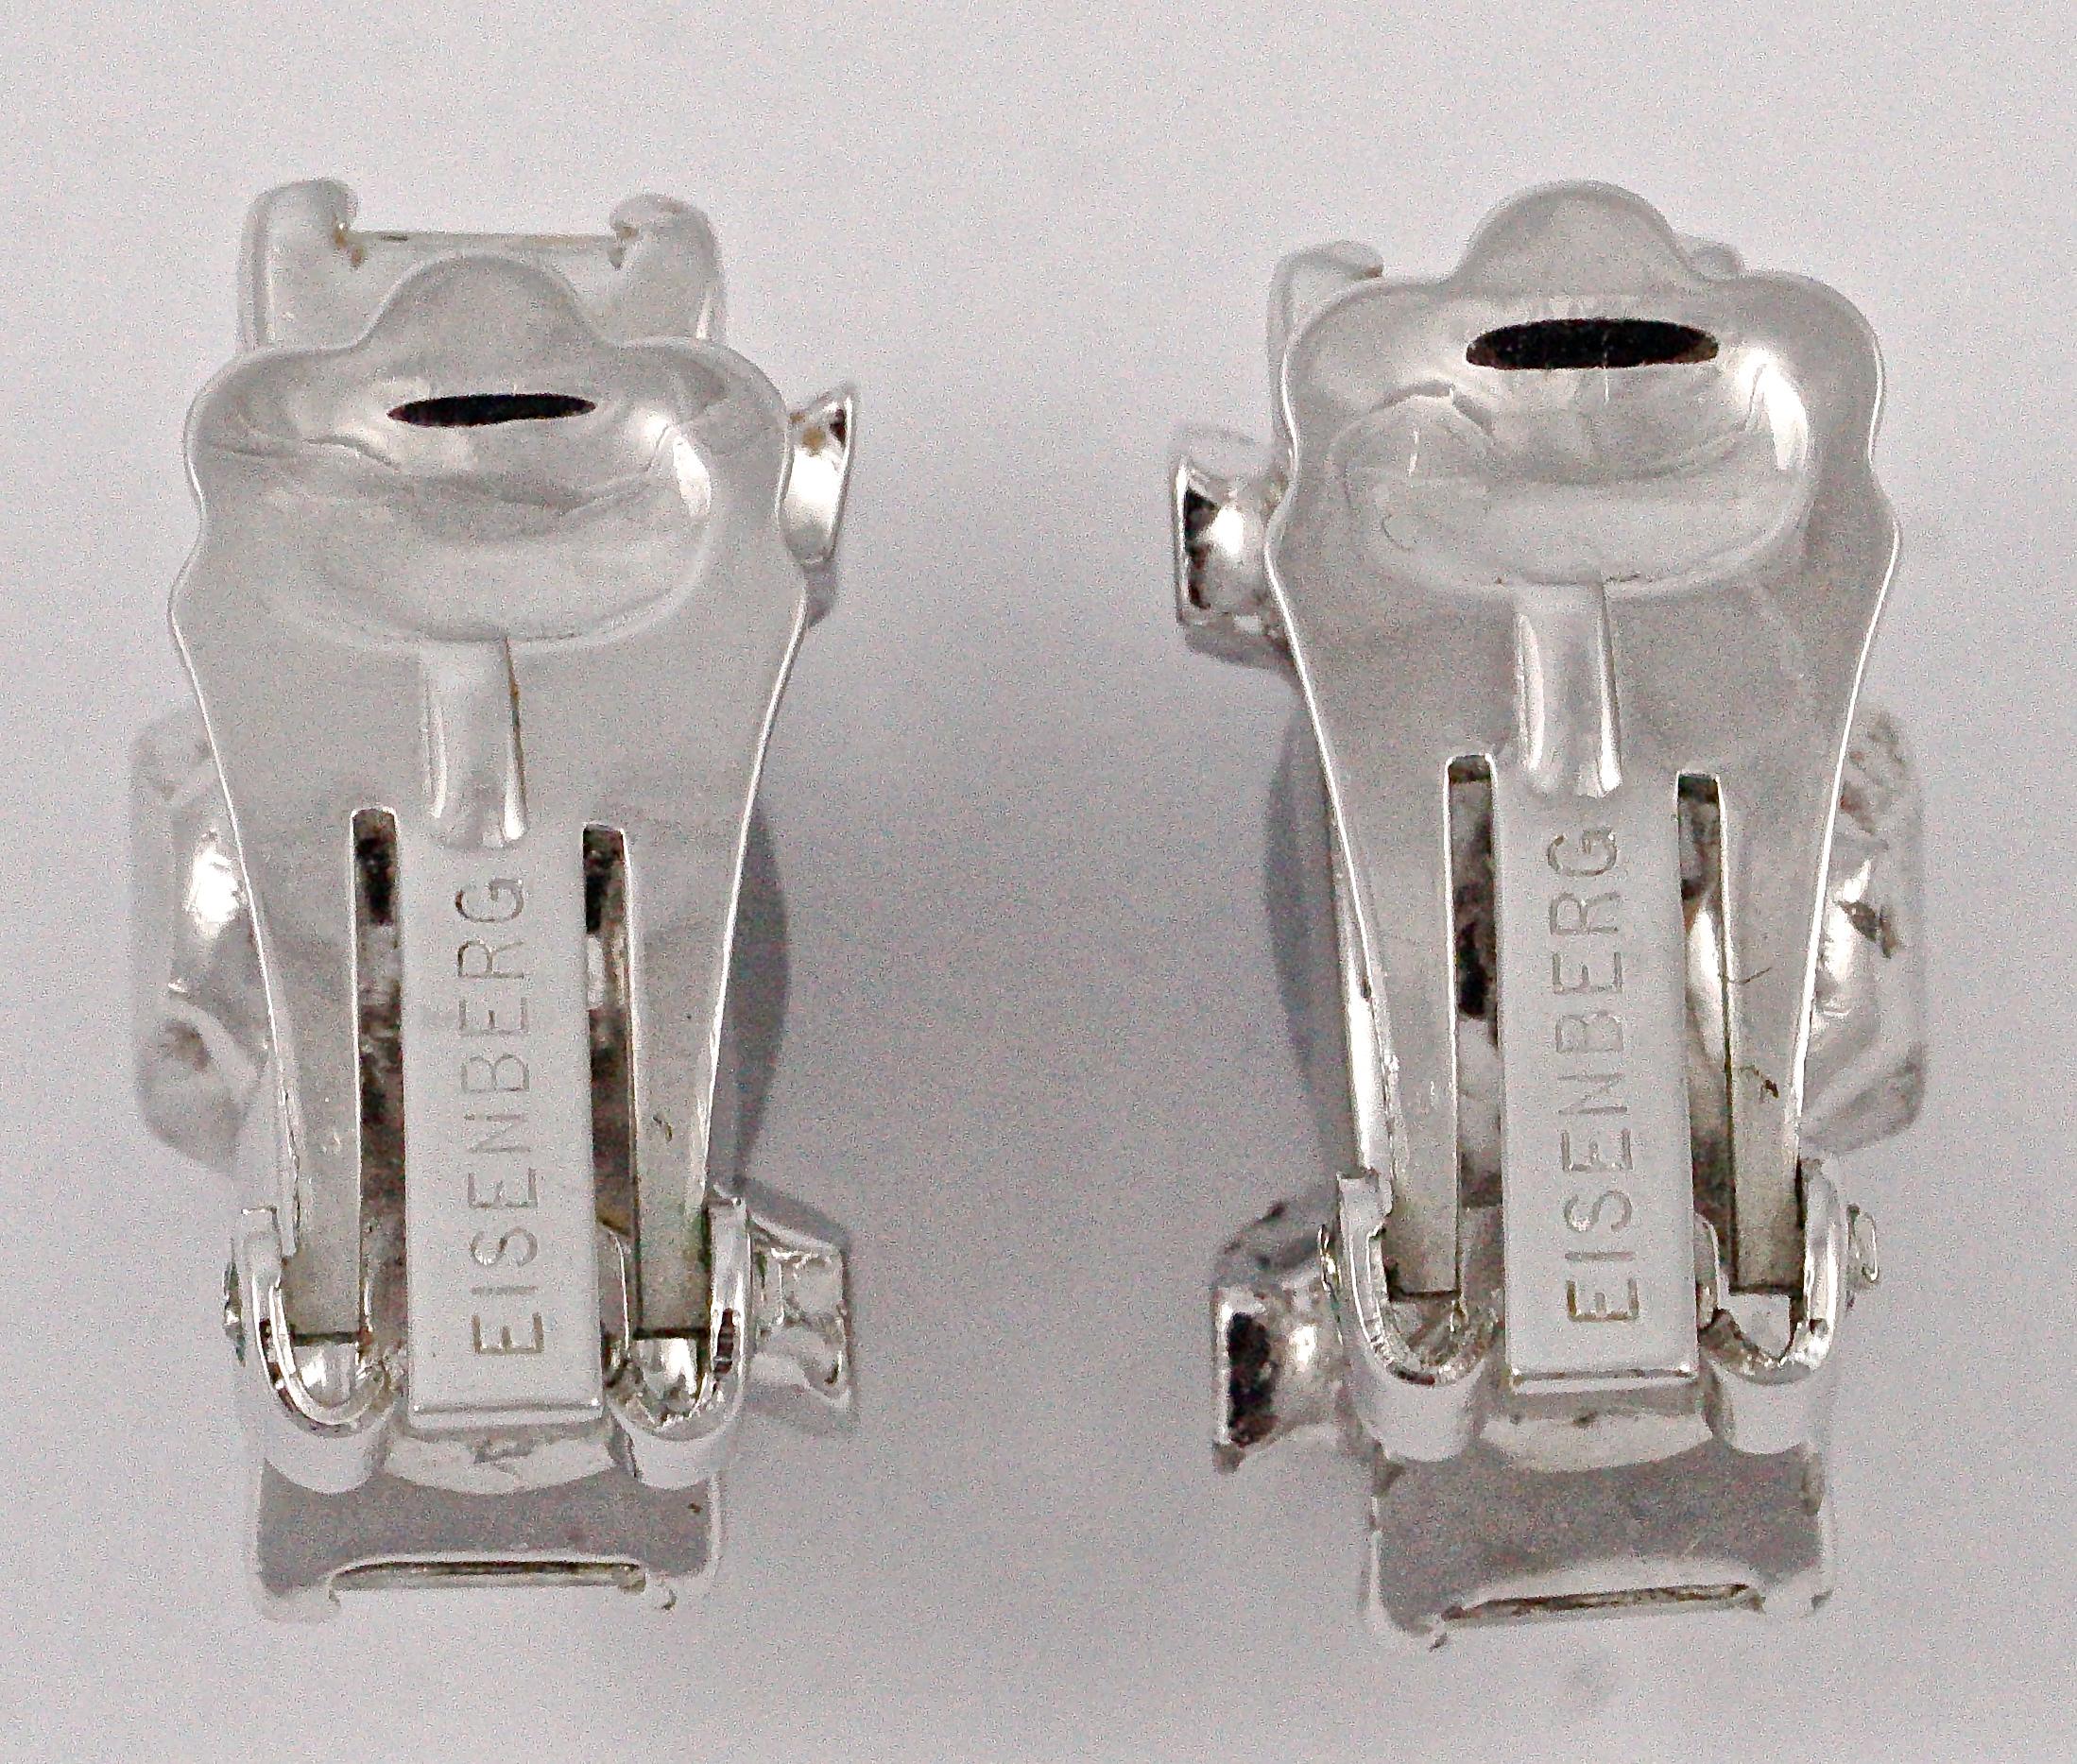 Beautiful Eisenberg silver tone clip on earrings, featuring round and emerald cut clear rhinestones. They have an unusual design with the large emerald cut rhinestones overlaid with an abstract V shape set with round rhinestones. Measuring length